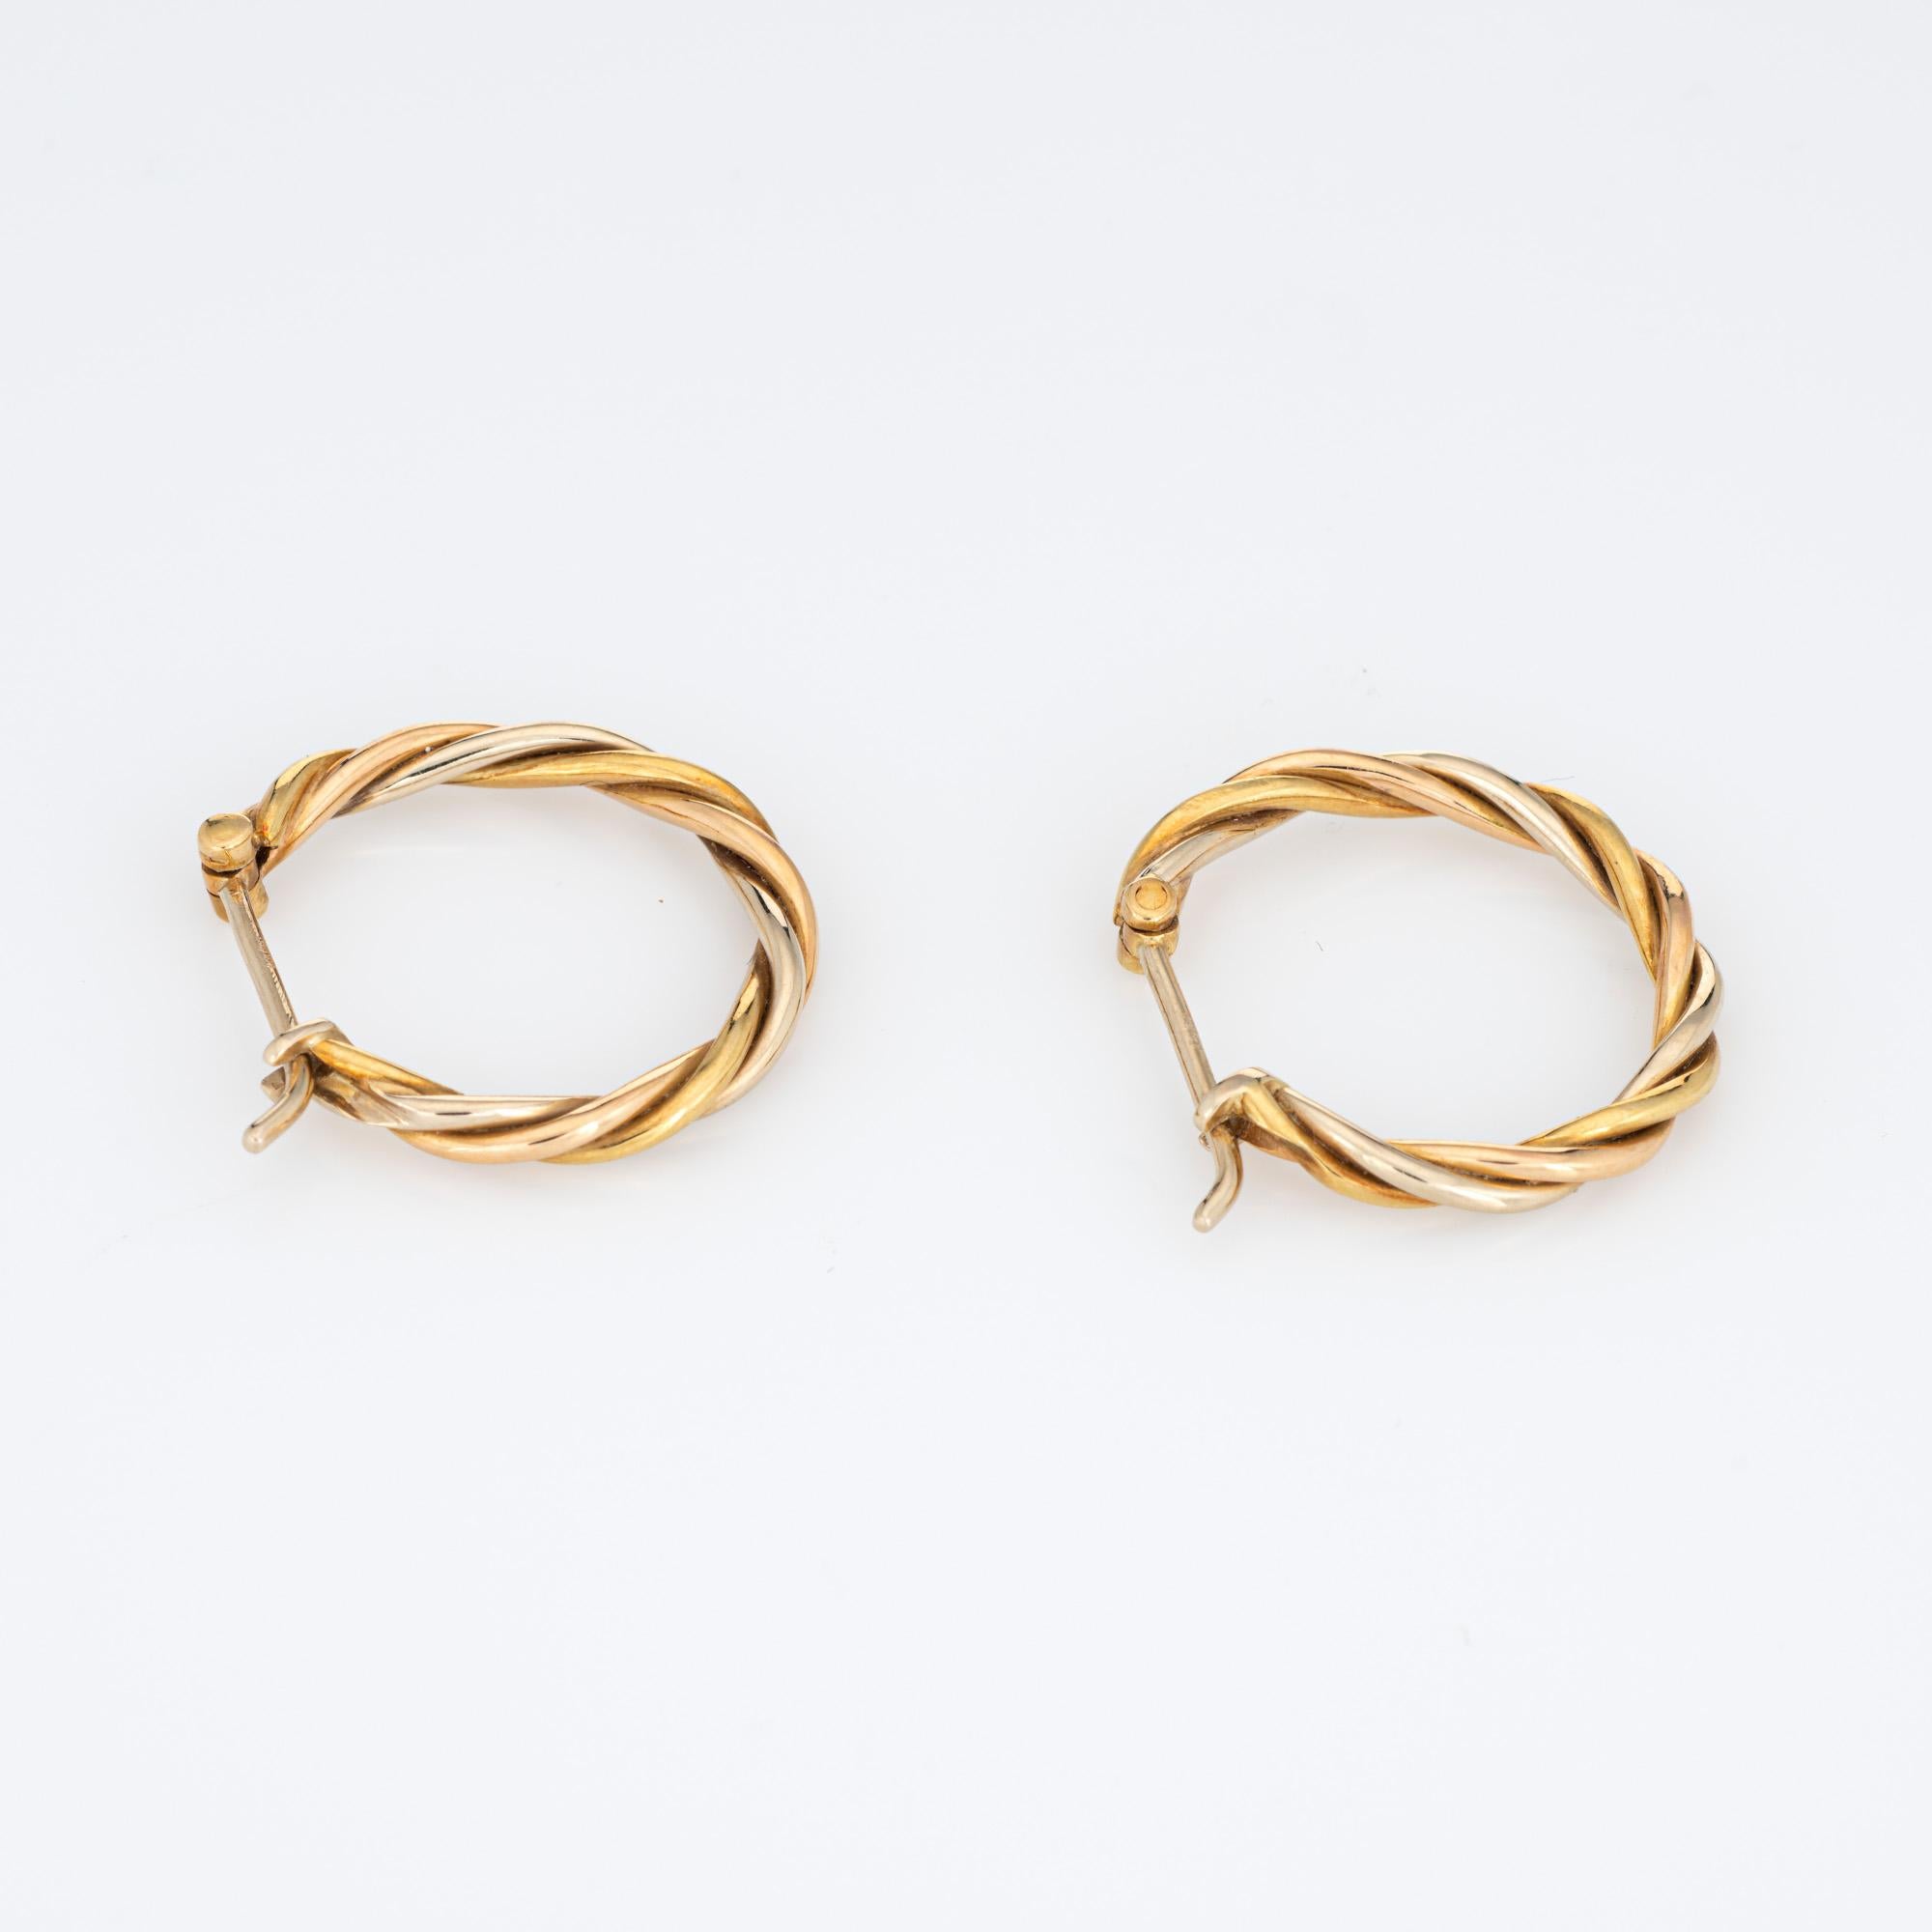 Out of production vintage Cartier 'Trinity' earrings crafted in 18k yellow, rose and white gold (circa 1990s).  

The polished gold Cartier earrings measure 3/4 inch in length and are designed as a smaller hoop. The earrings are fitted with posts to